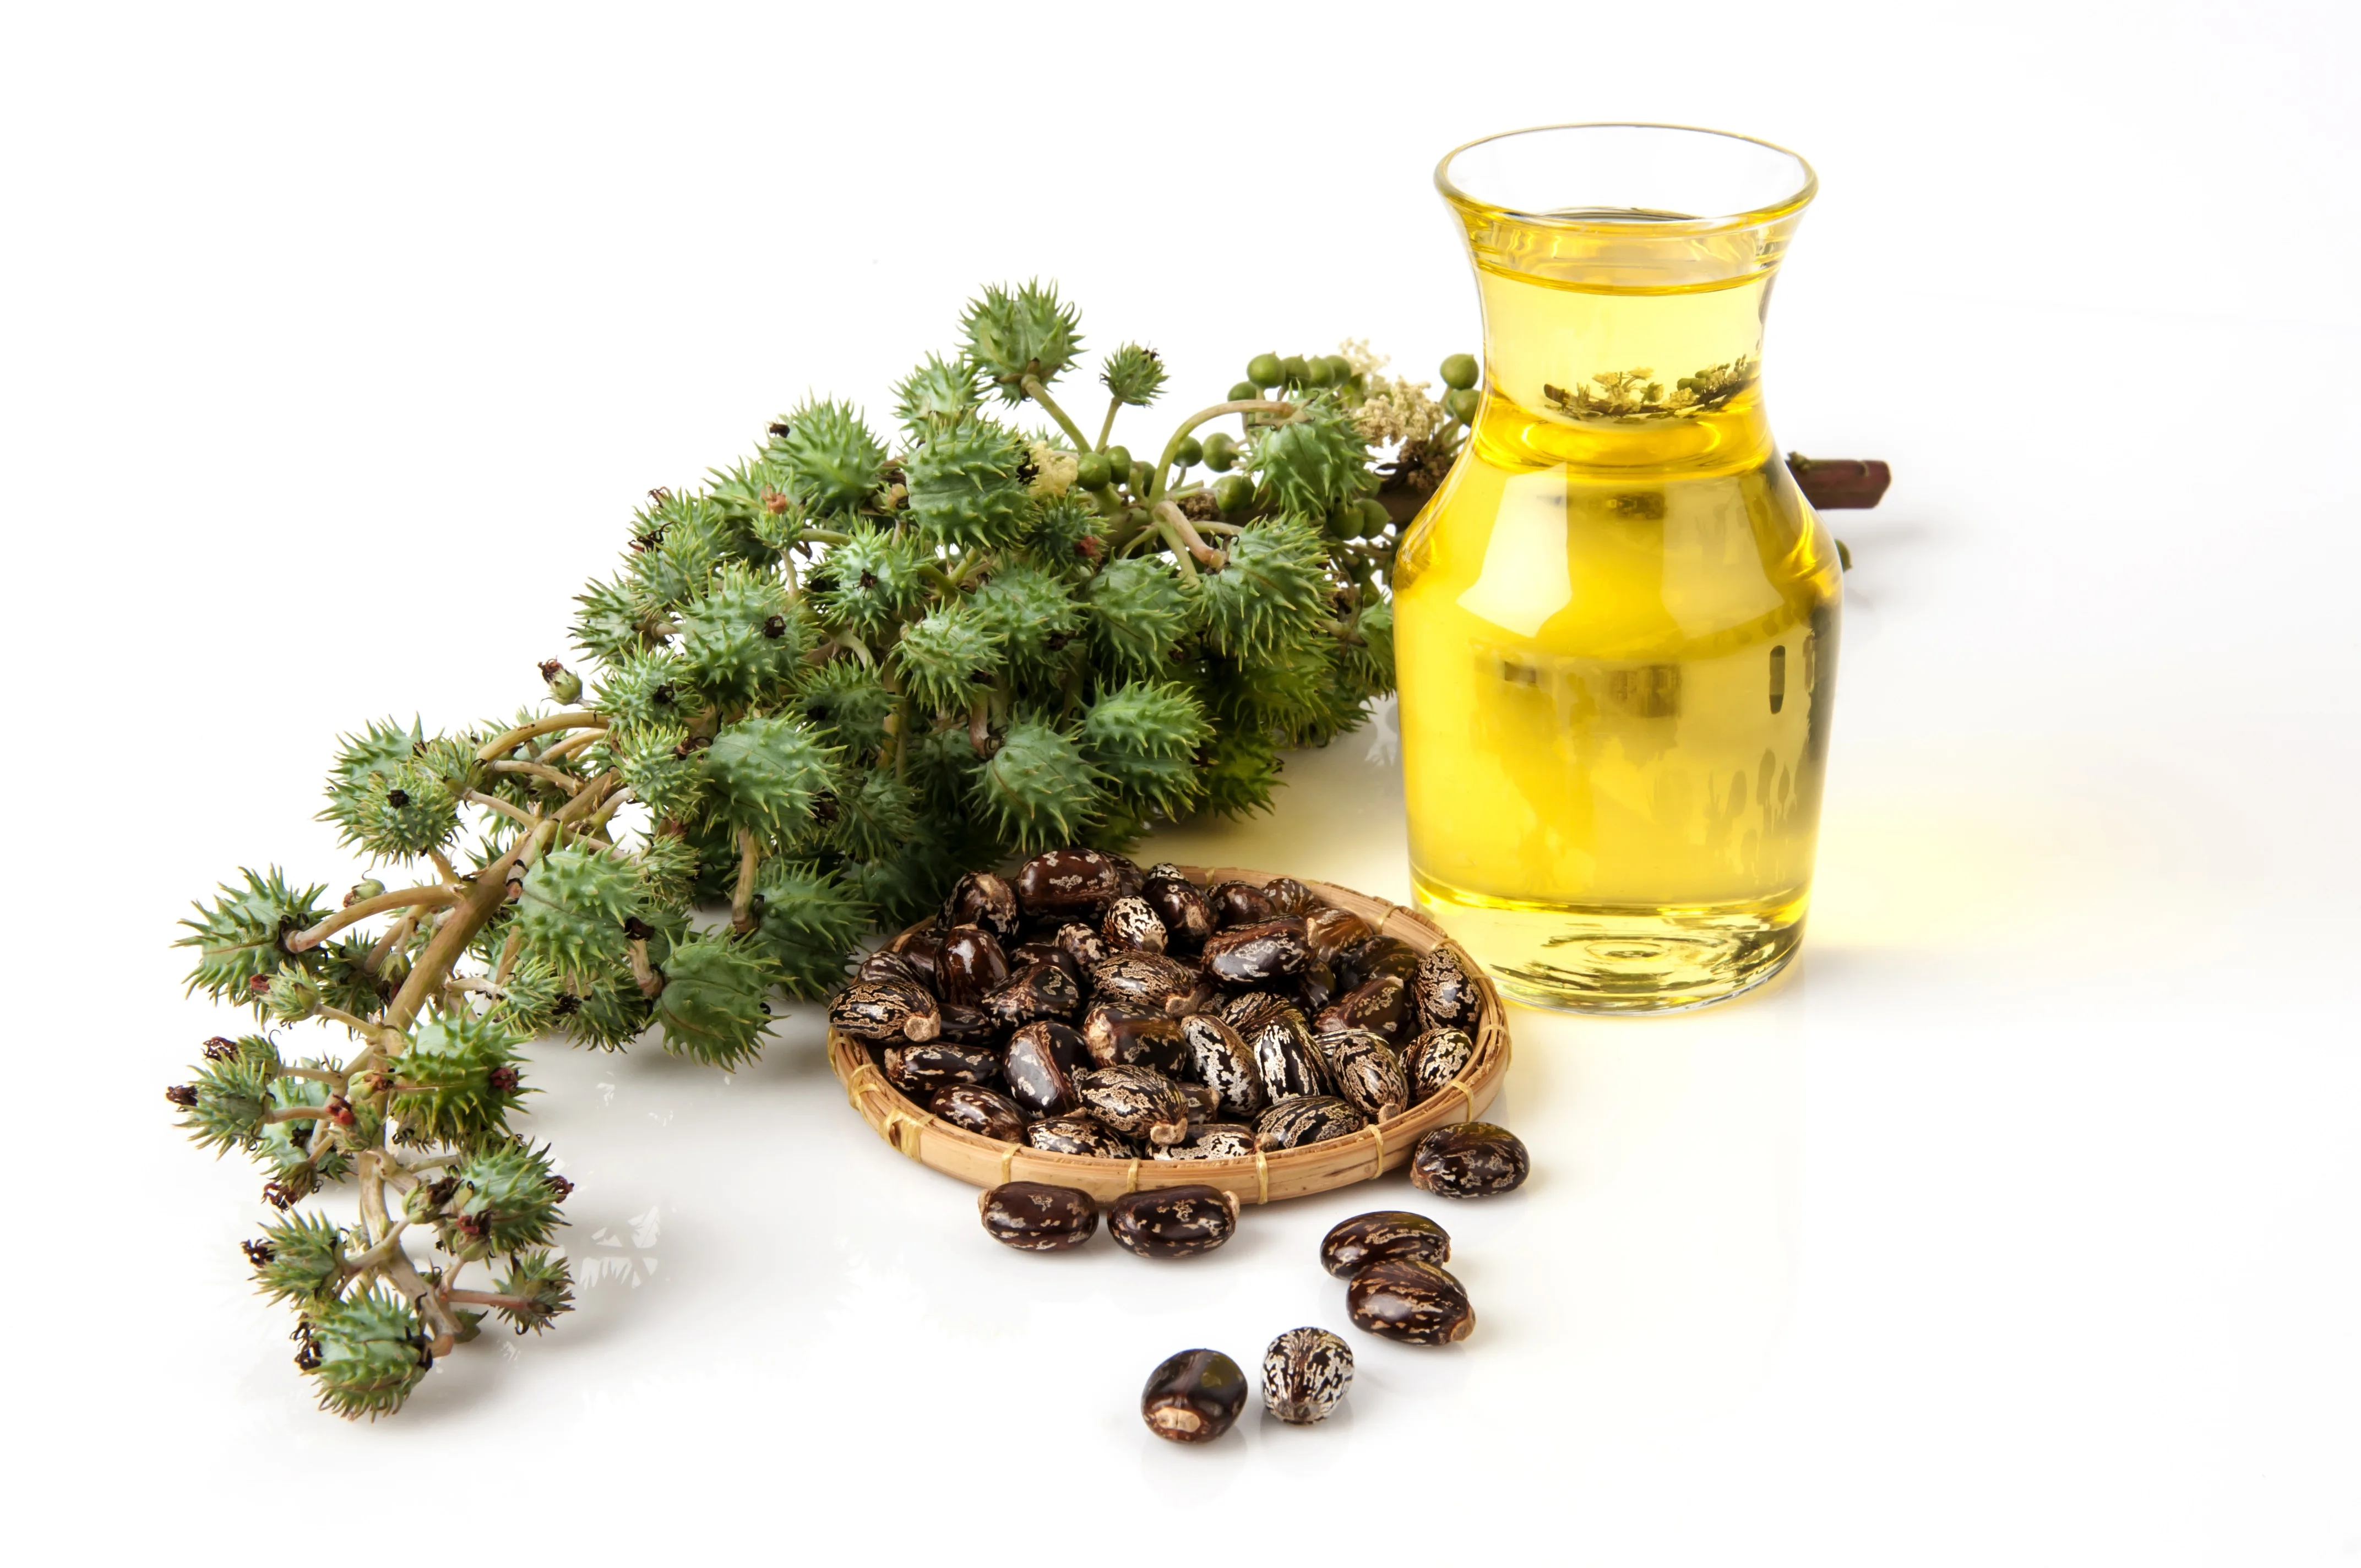 Global Castor Oil Market 2020 Research by Business Analysis ...